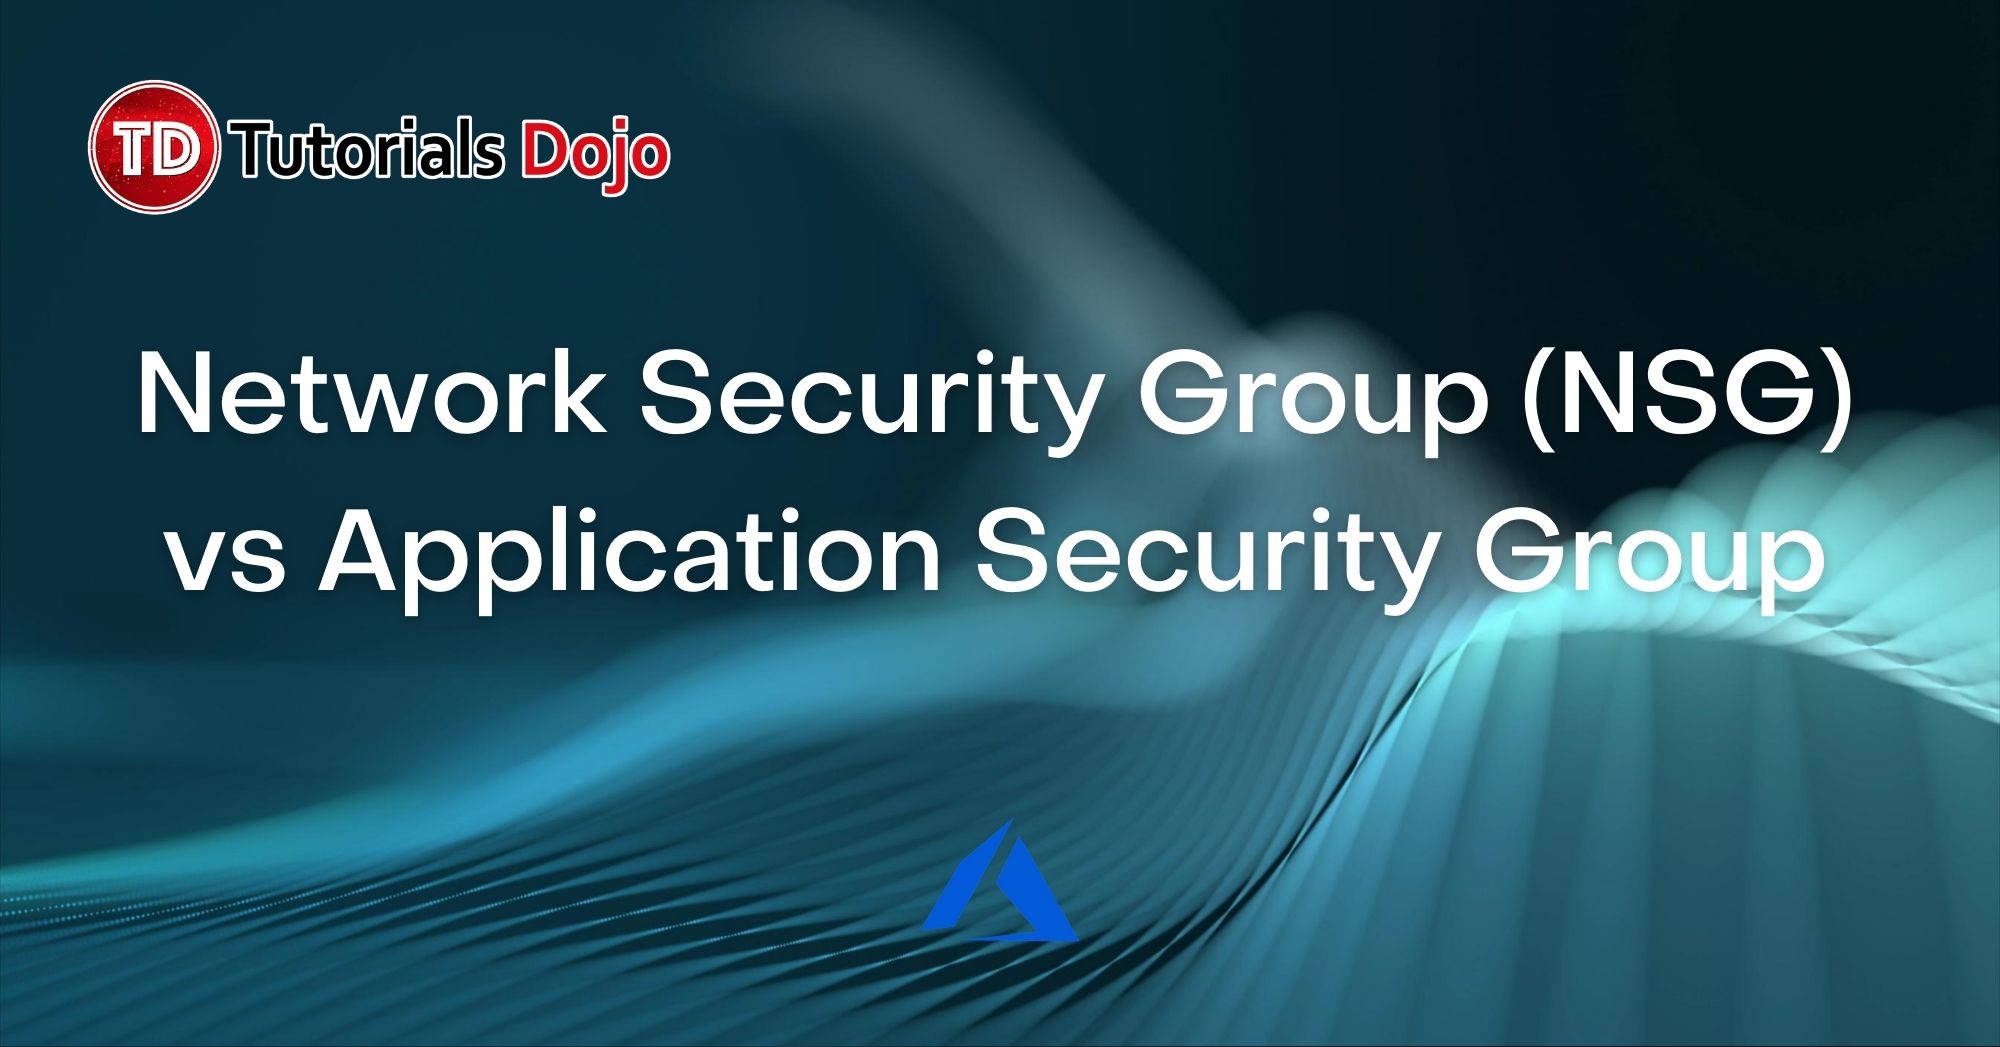 Network Security Group (NSG) vs Application Security Group